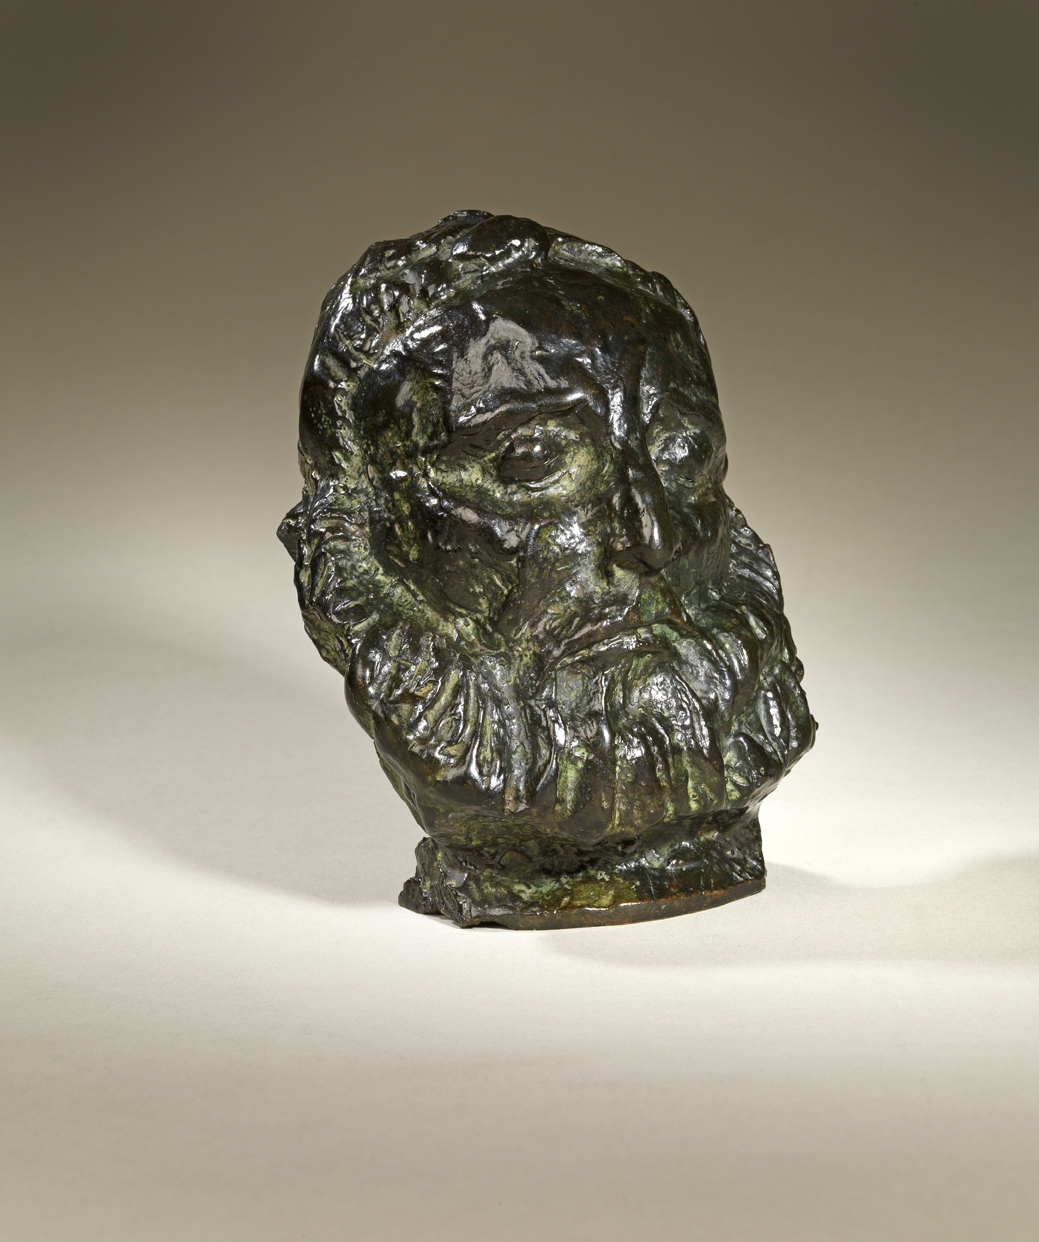 Mask of Bourdelle as a Musician, c. 1916